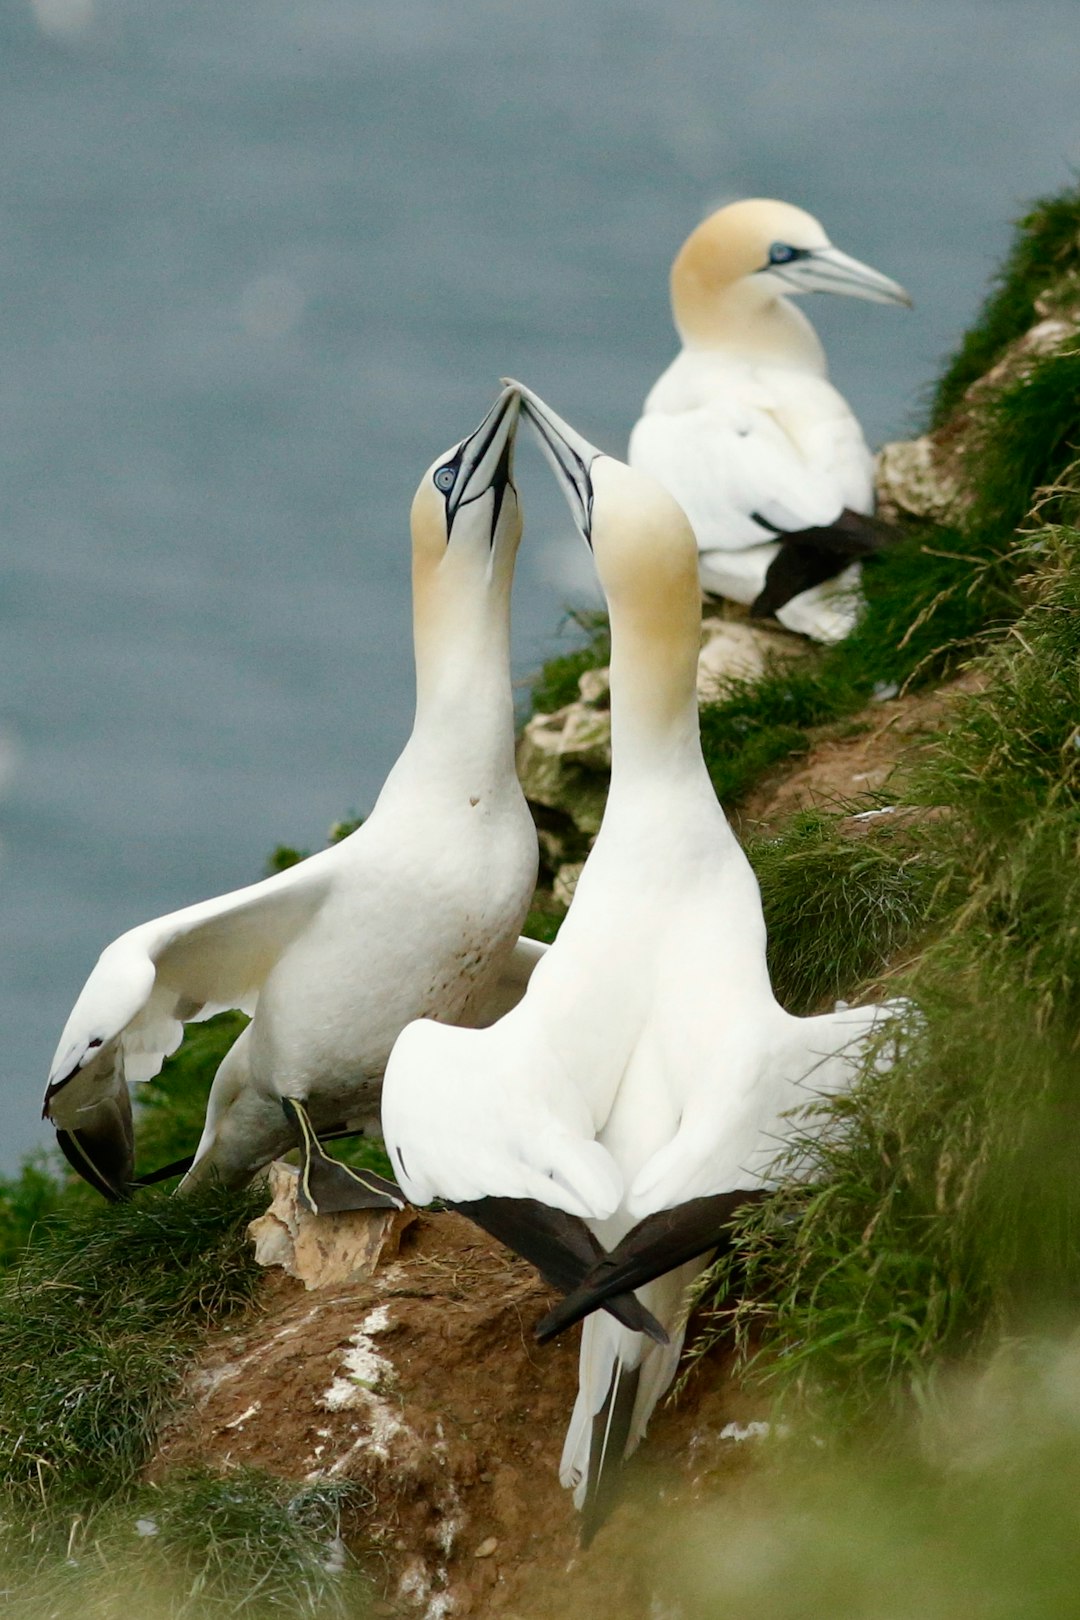 Travel Tips and Stories of Bempton in United Kingdom